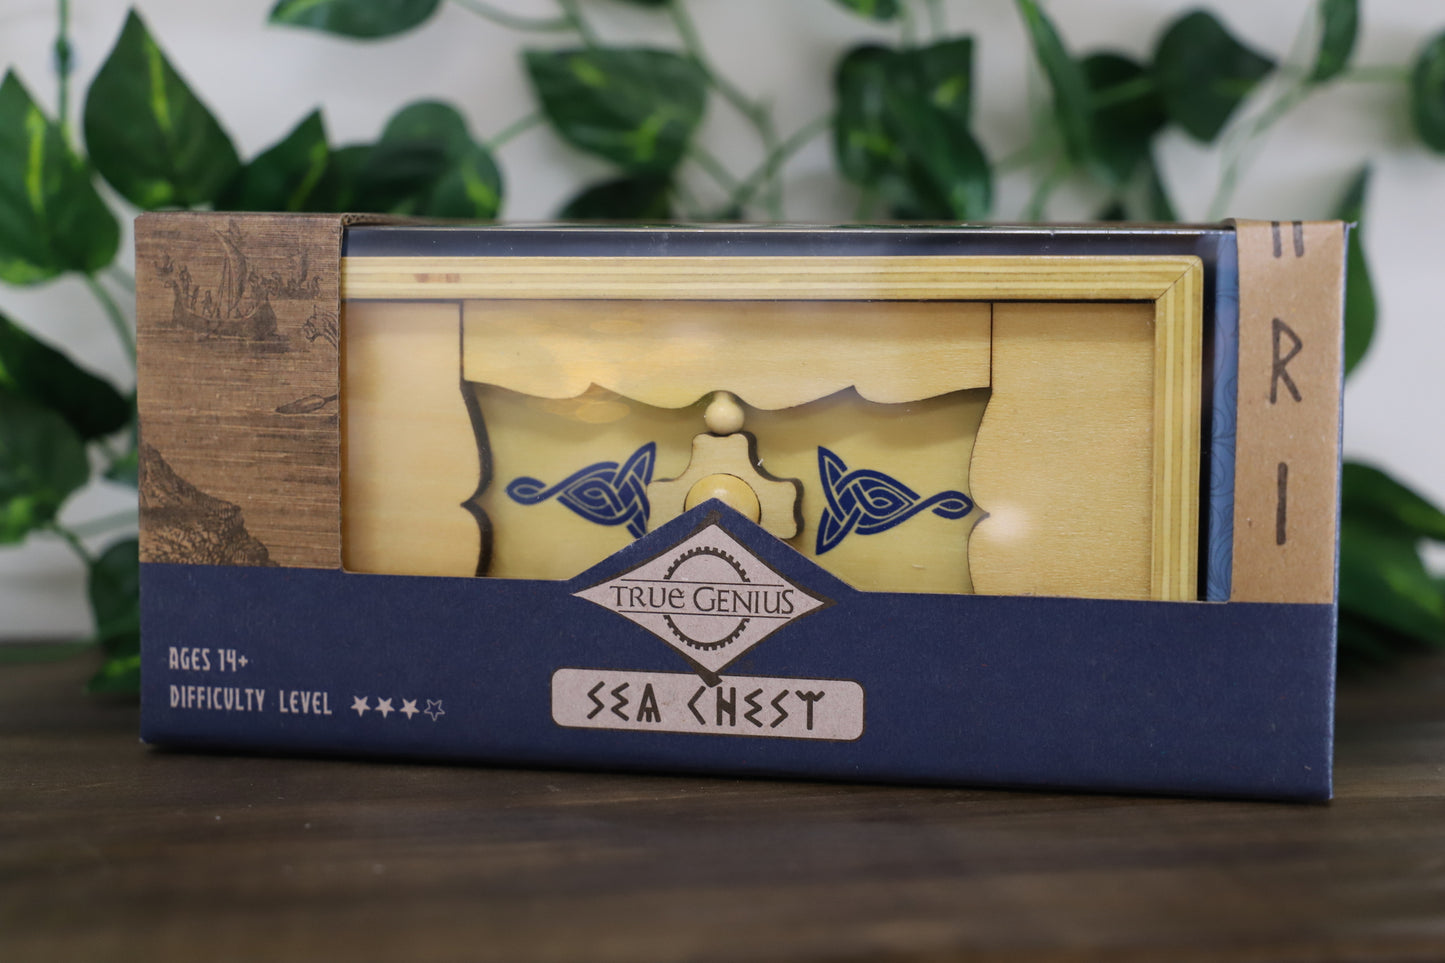 Sea Chest by Project Genius